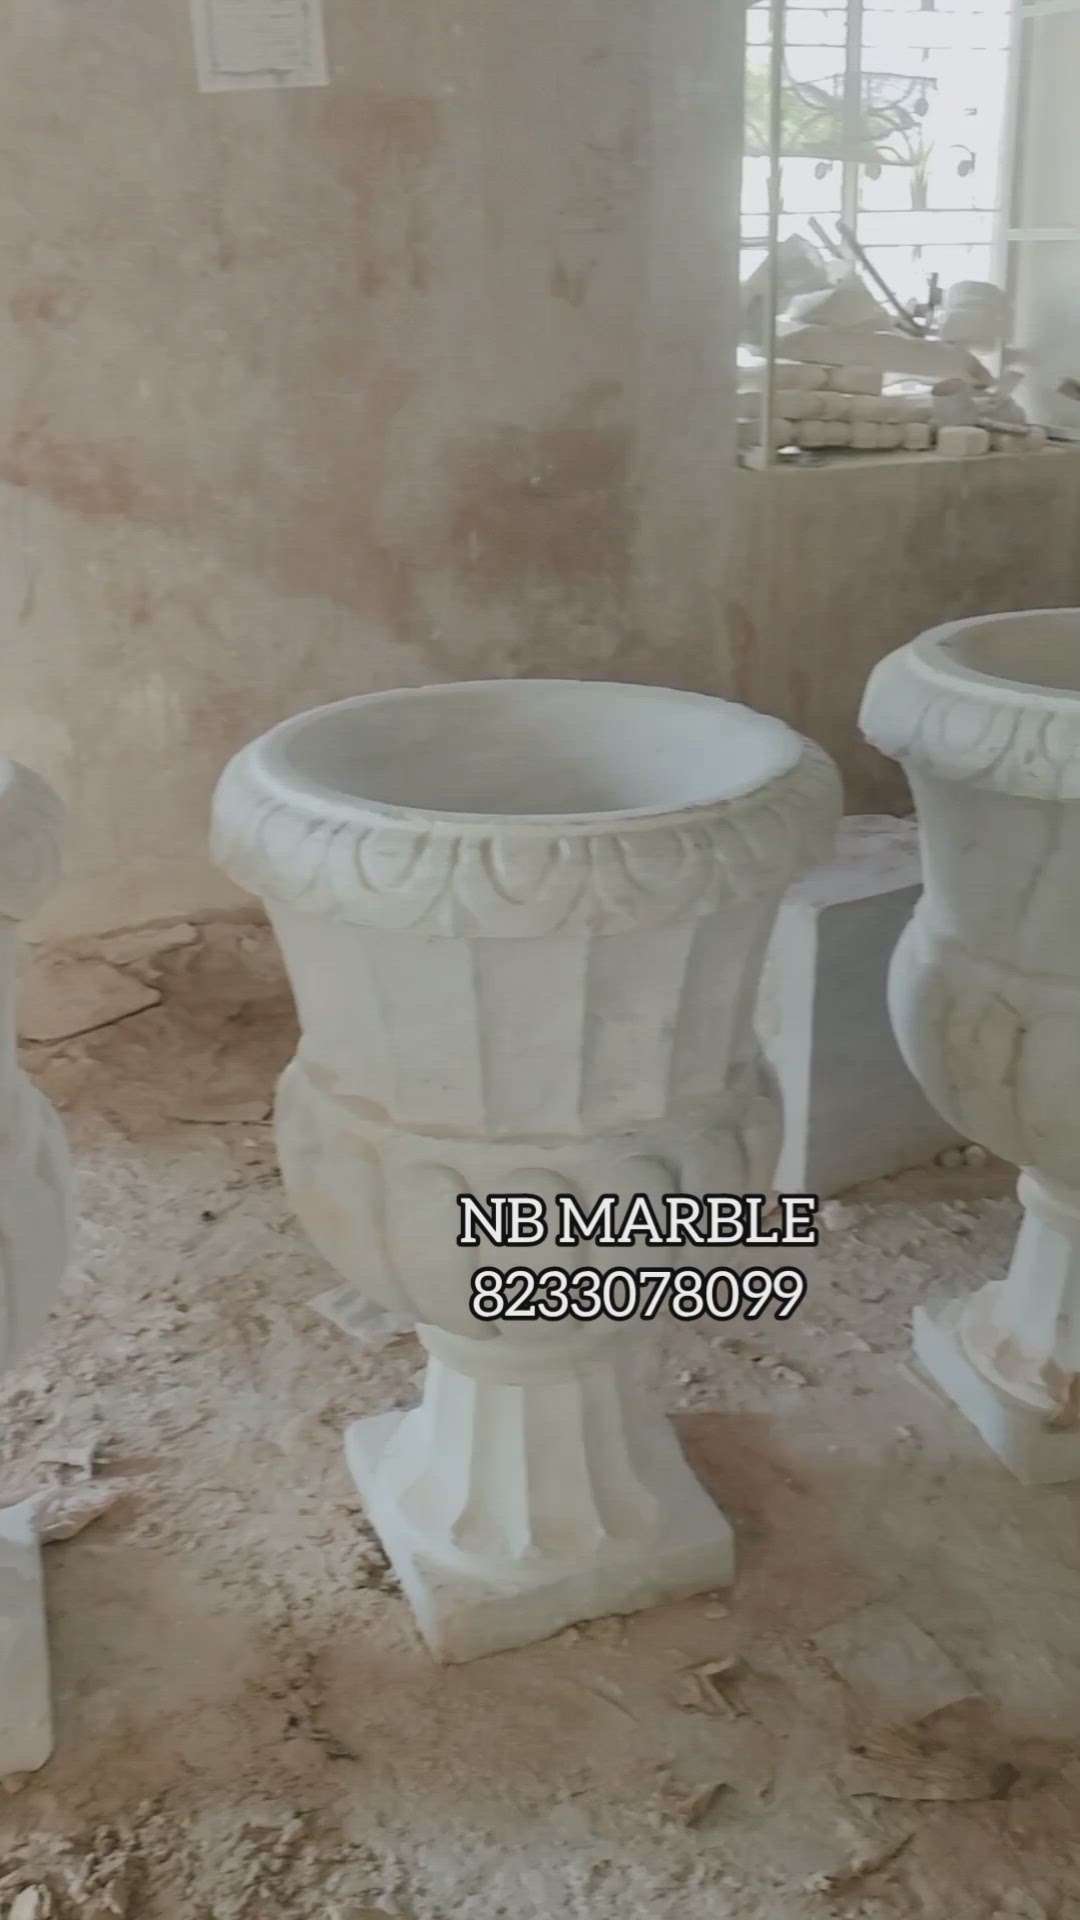 Marble Flower Pots 

Decor your garden and Home entrance

We are manufacturer of marble and sandstone flower pots

We make any design according to your requirement and size

Follow me on instagram
@nbmarble

More Information Contact Me
8233078099

#gardendecor #nbmarble #gardensofinstagram #stone #flowerlovers #interiordesigner #homedecoration